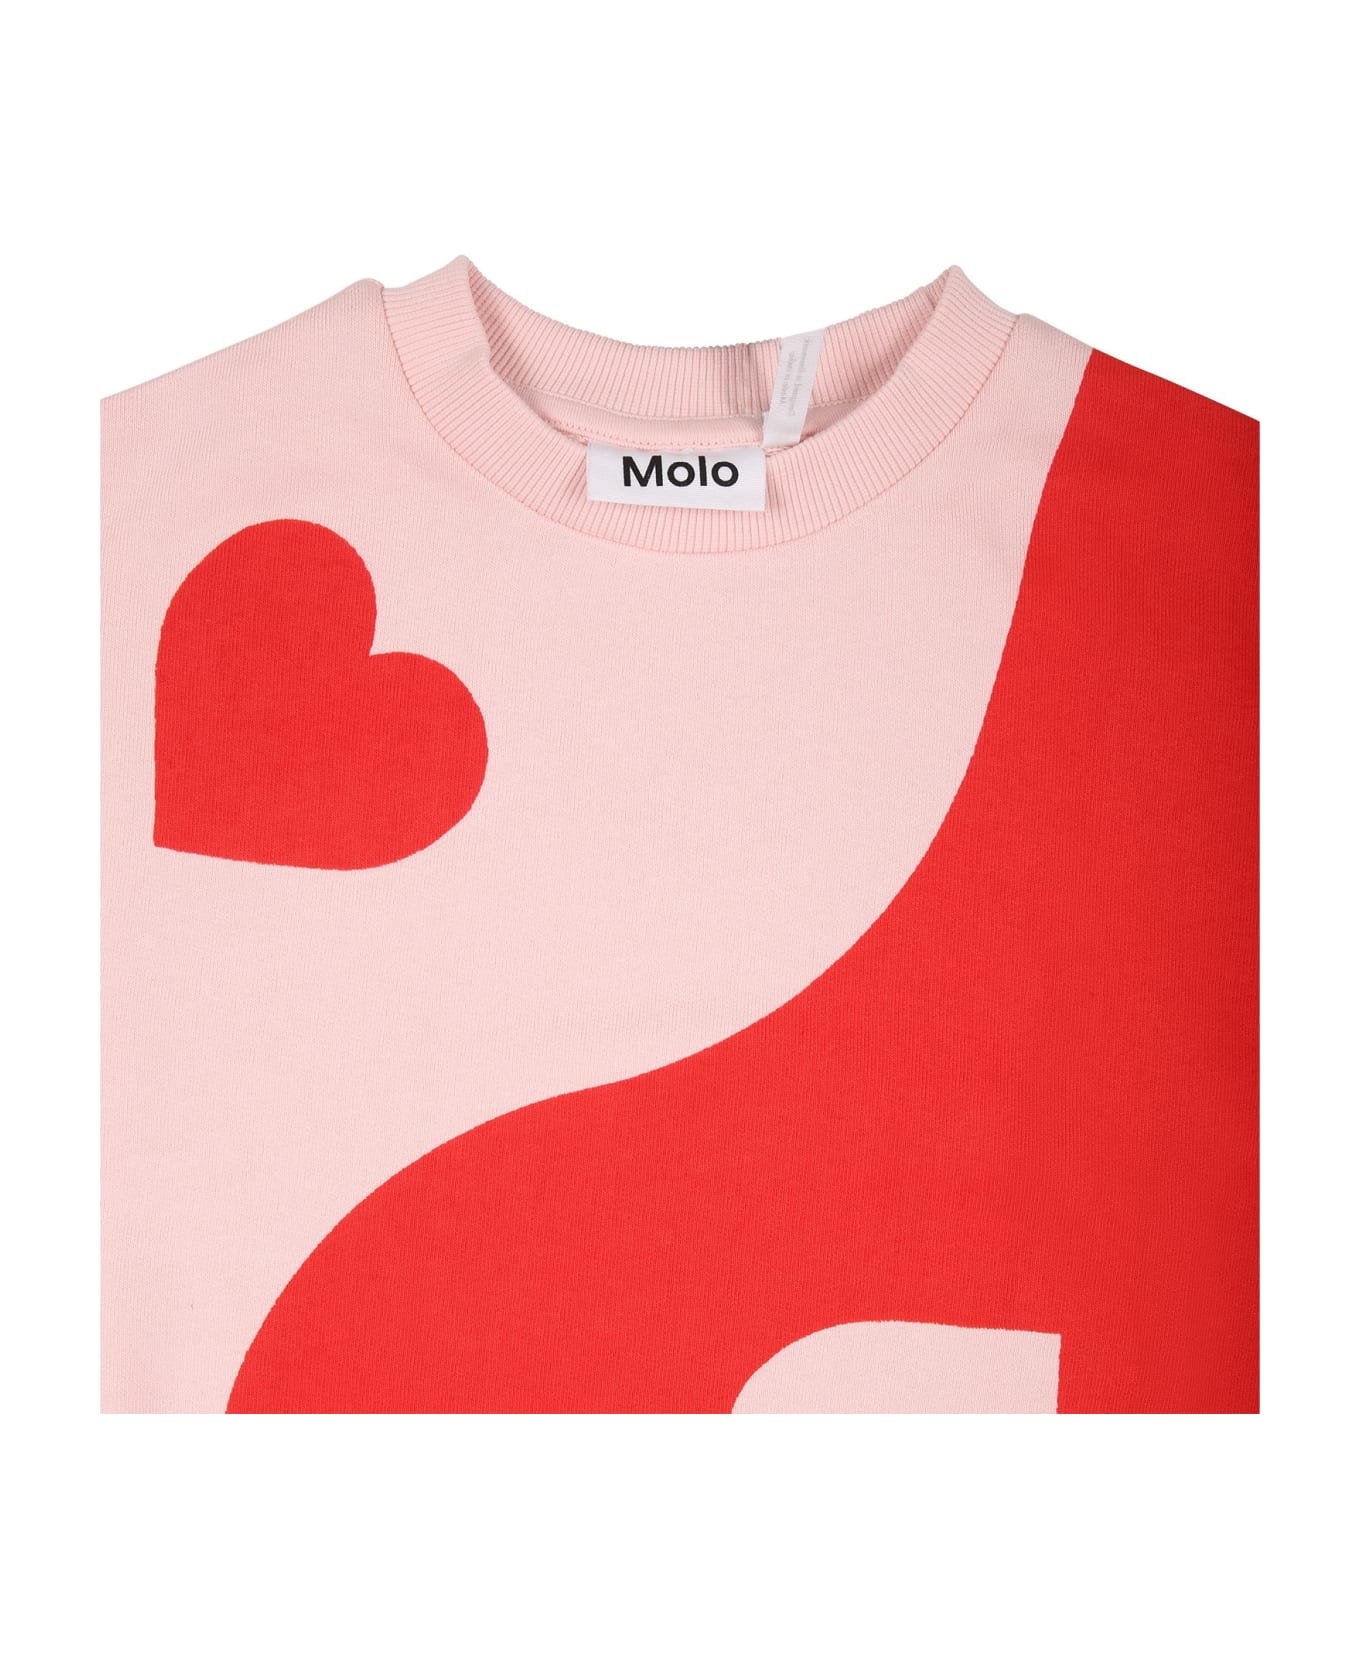 Molo Red Sweatshirt For Girl With Hearts Print - Multicolor